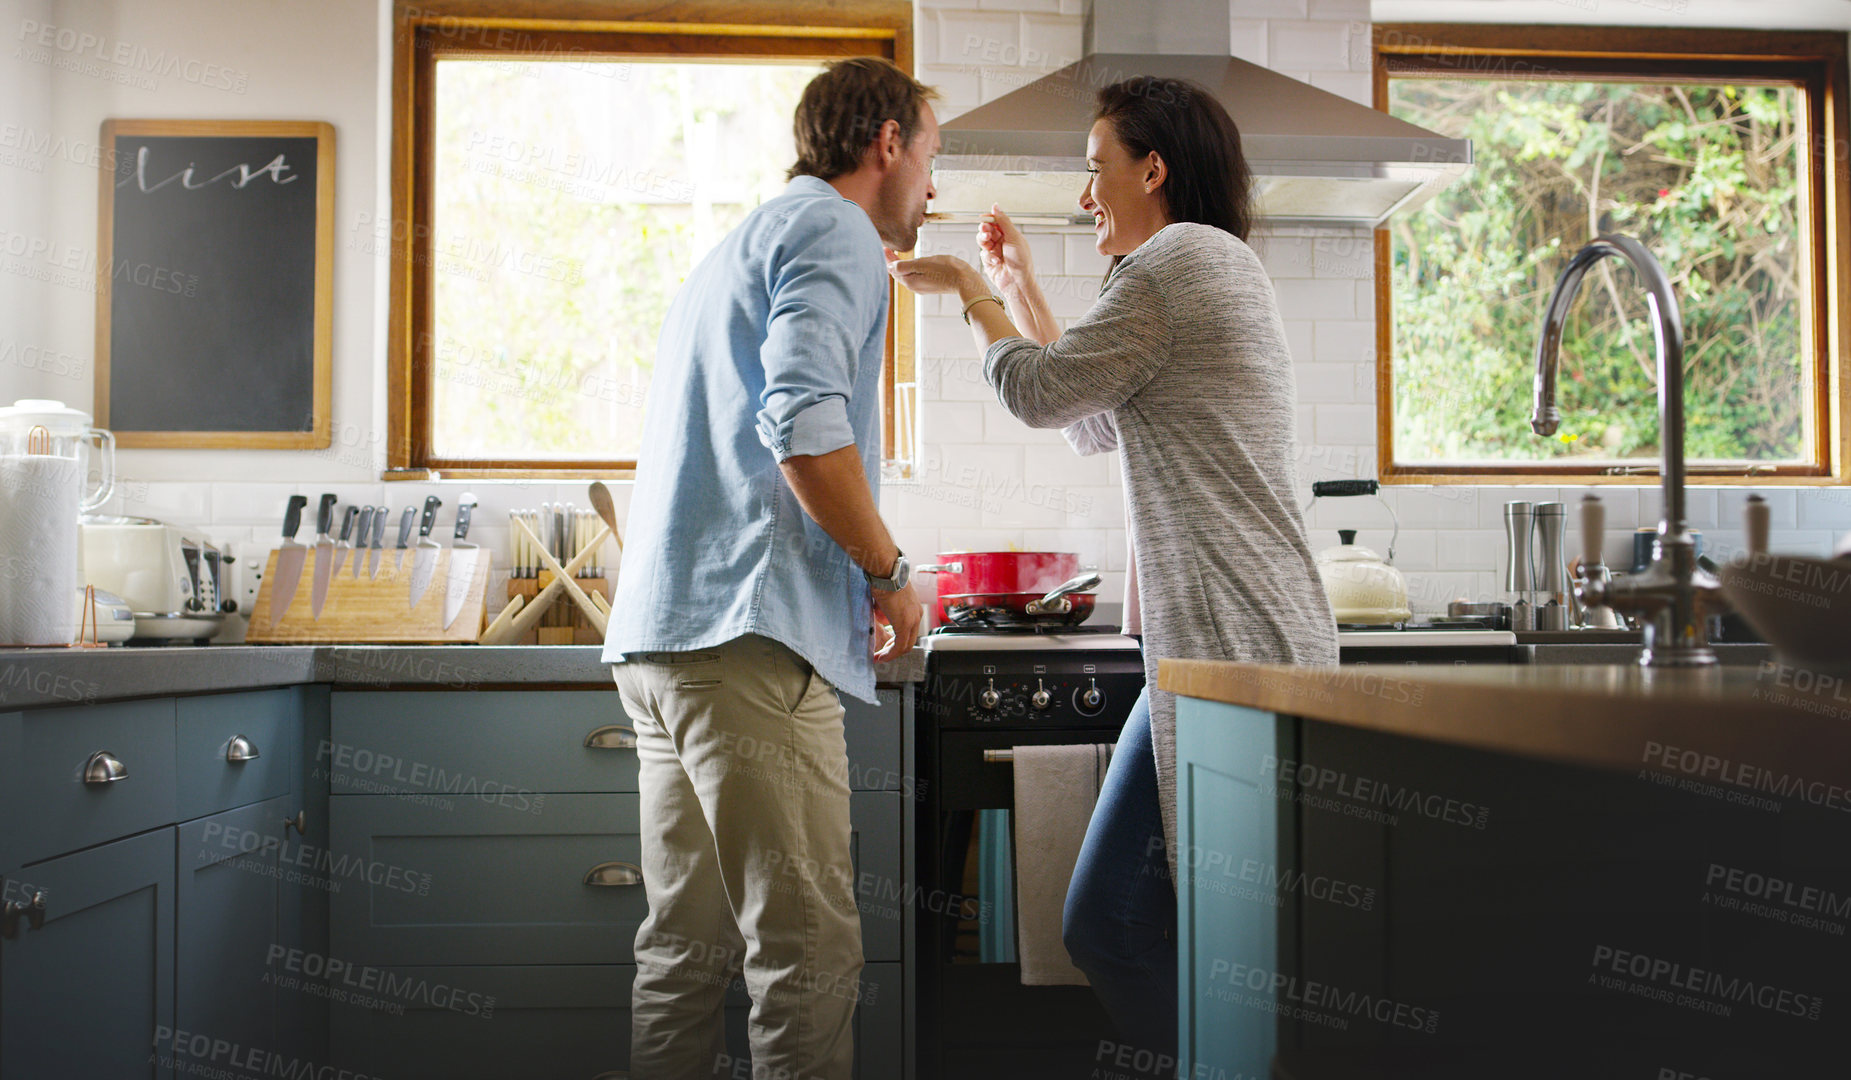 Buy stock photo Cropped shot of an affectionate young woman feeding her husband a spoonful of her food while cooking in their kitchen